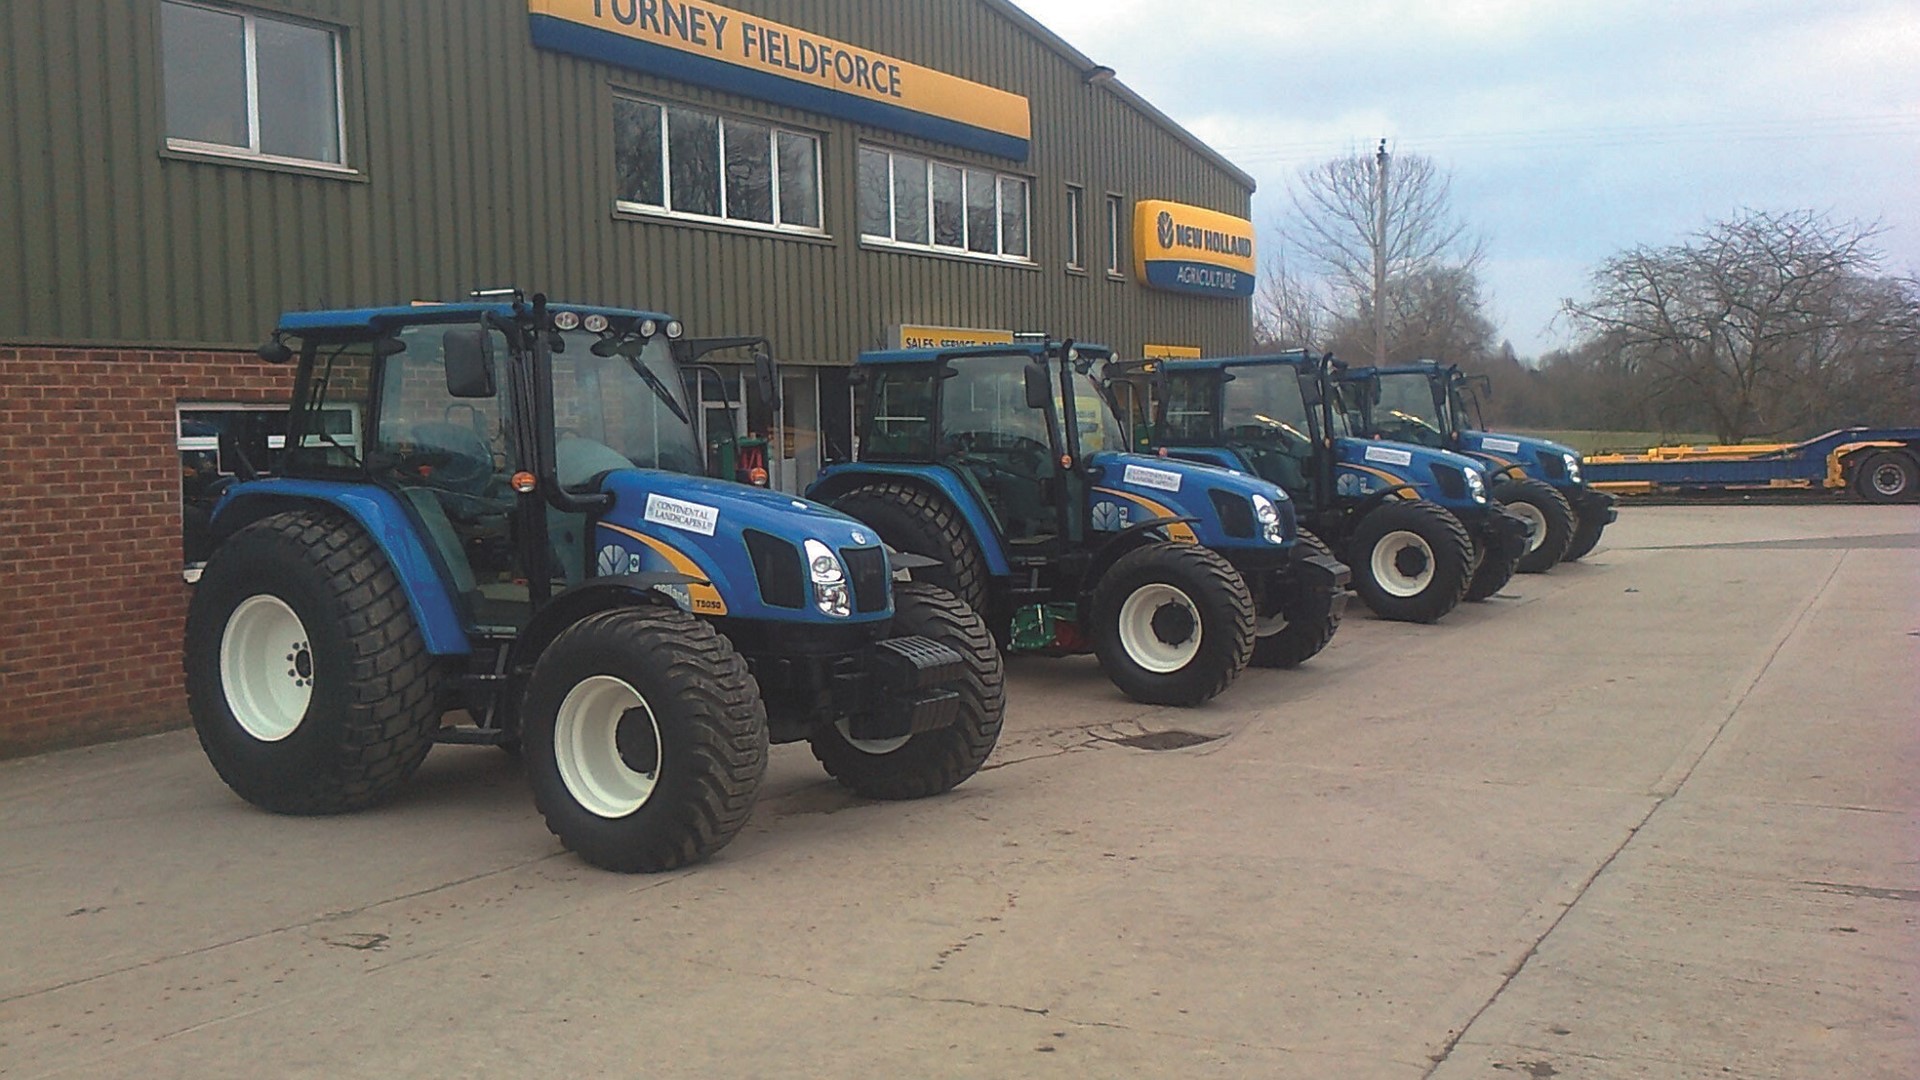 Groundcare tractors supplied by the Turney dealership in the UK